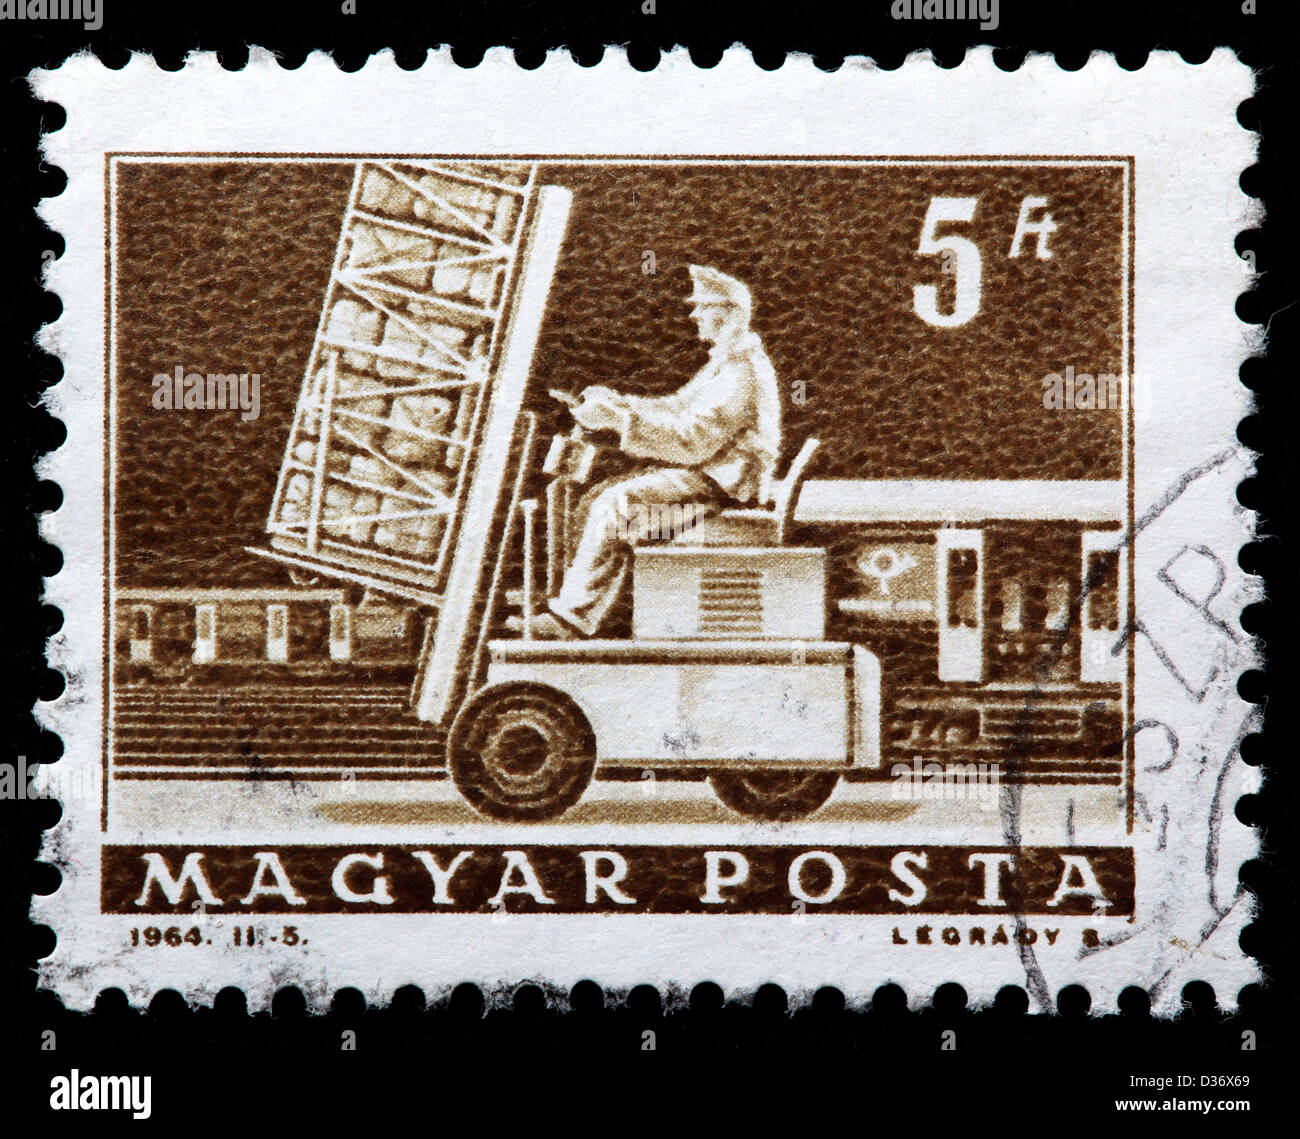 Hydraulic lift truck and mail car, postage stamp, Hungary, 1964 Stock Photo